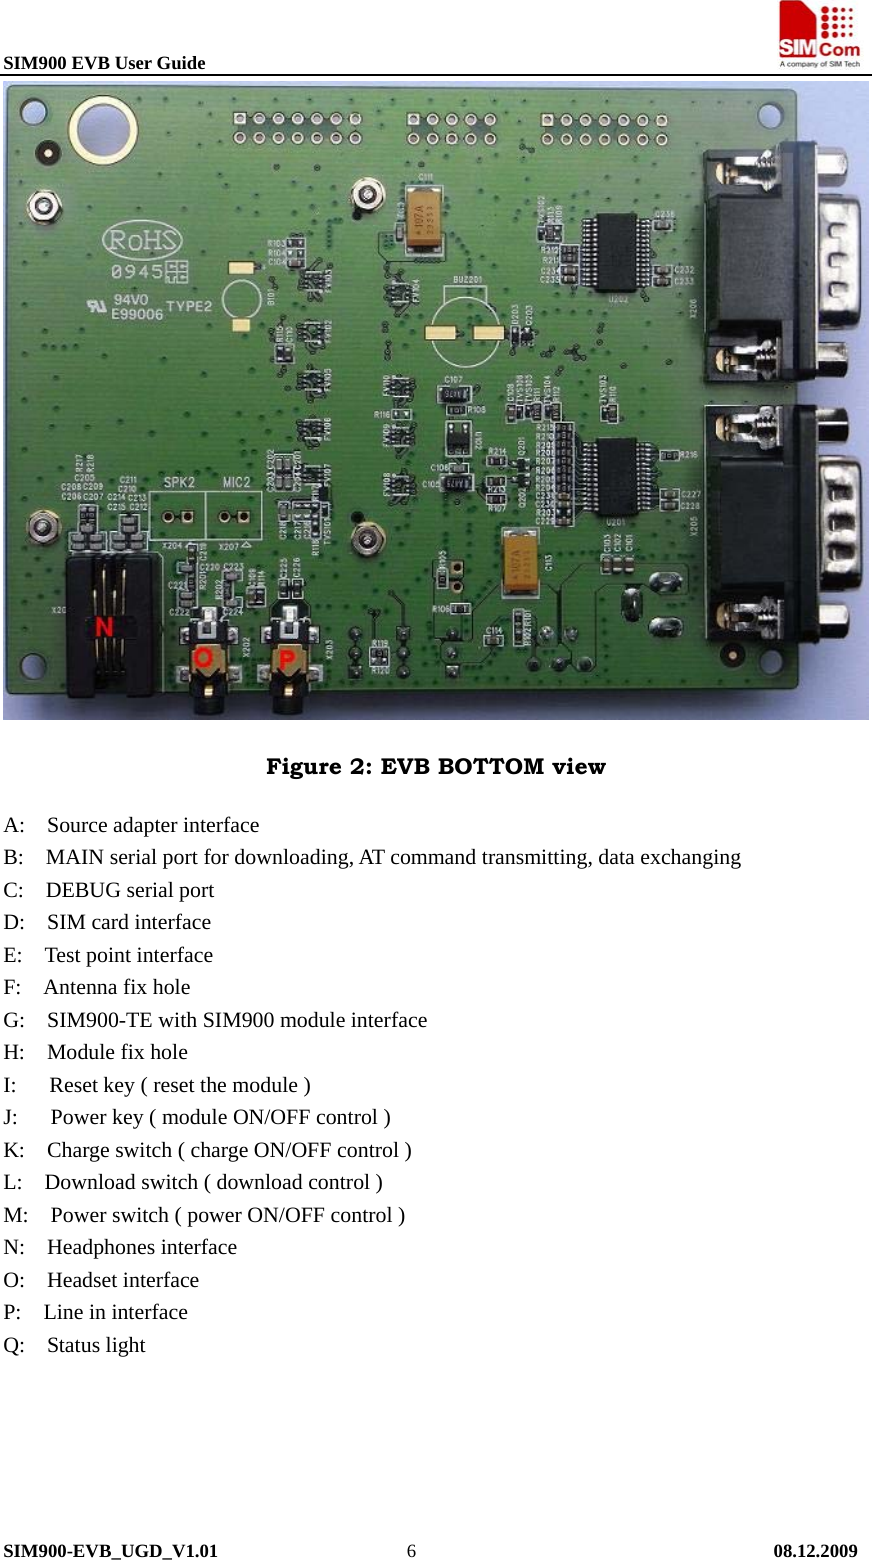 SIM900 EVB User Guide                                                                       SIM900-EVB_UGD_V1.01                    6                                      08.12.2009  Figure 2: EVB BOTTOM view A:  Source adapter interface  B:    MAIN serial port for downloading, AT command transmitting, data exchanging     C:  DEBUG serial port   D:  SIM card interface E:    Test point interface   F:  Antenna fix hole  G:    SIM900-TE with SIM900 module interface   H:  Module fix hole  I:      Reset key ( reset the module ) J:      Power key ( module ON/OFF control ) K:    Charge switch ( charge ON/OFF control )   L:    Download switch ( download control ) M:    Power switch ( power ON/OFF control ) N:  Headphones interface O:  Headset interface  P:  Line in interface Q:  Status light 